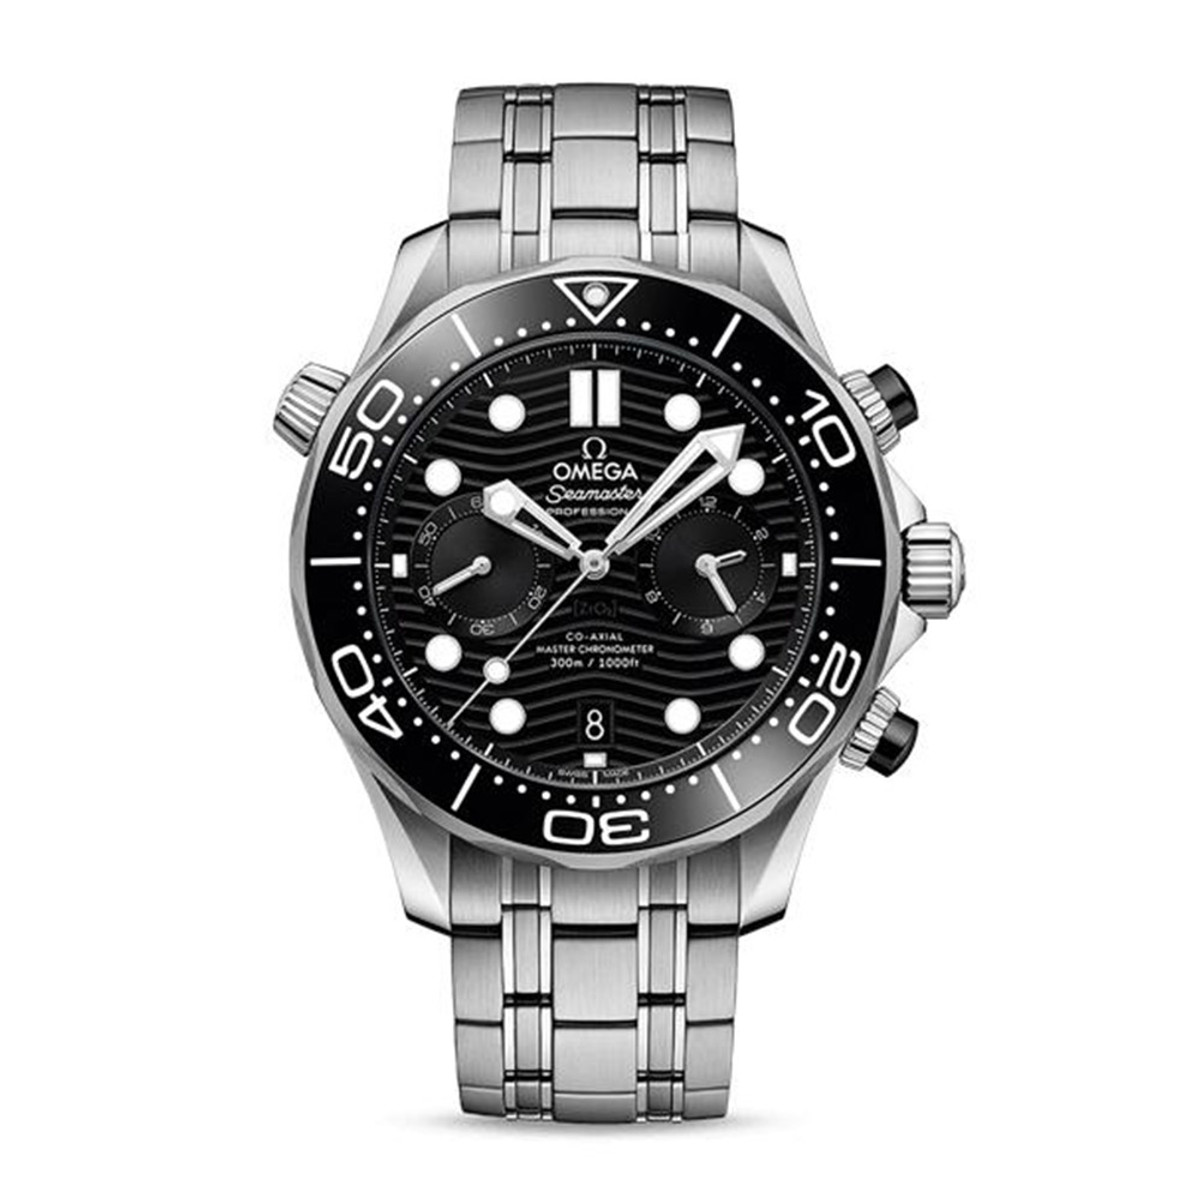 Omega Seamaster Diver 300M Chronograph 44mm 210.30.44.51.01.001-WOMG0894 Product Image